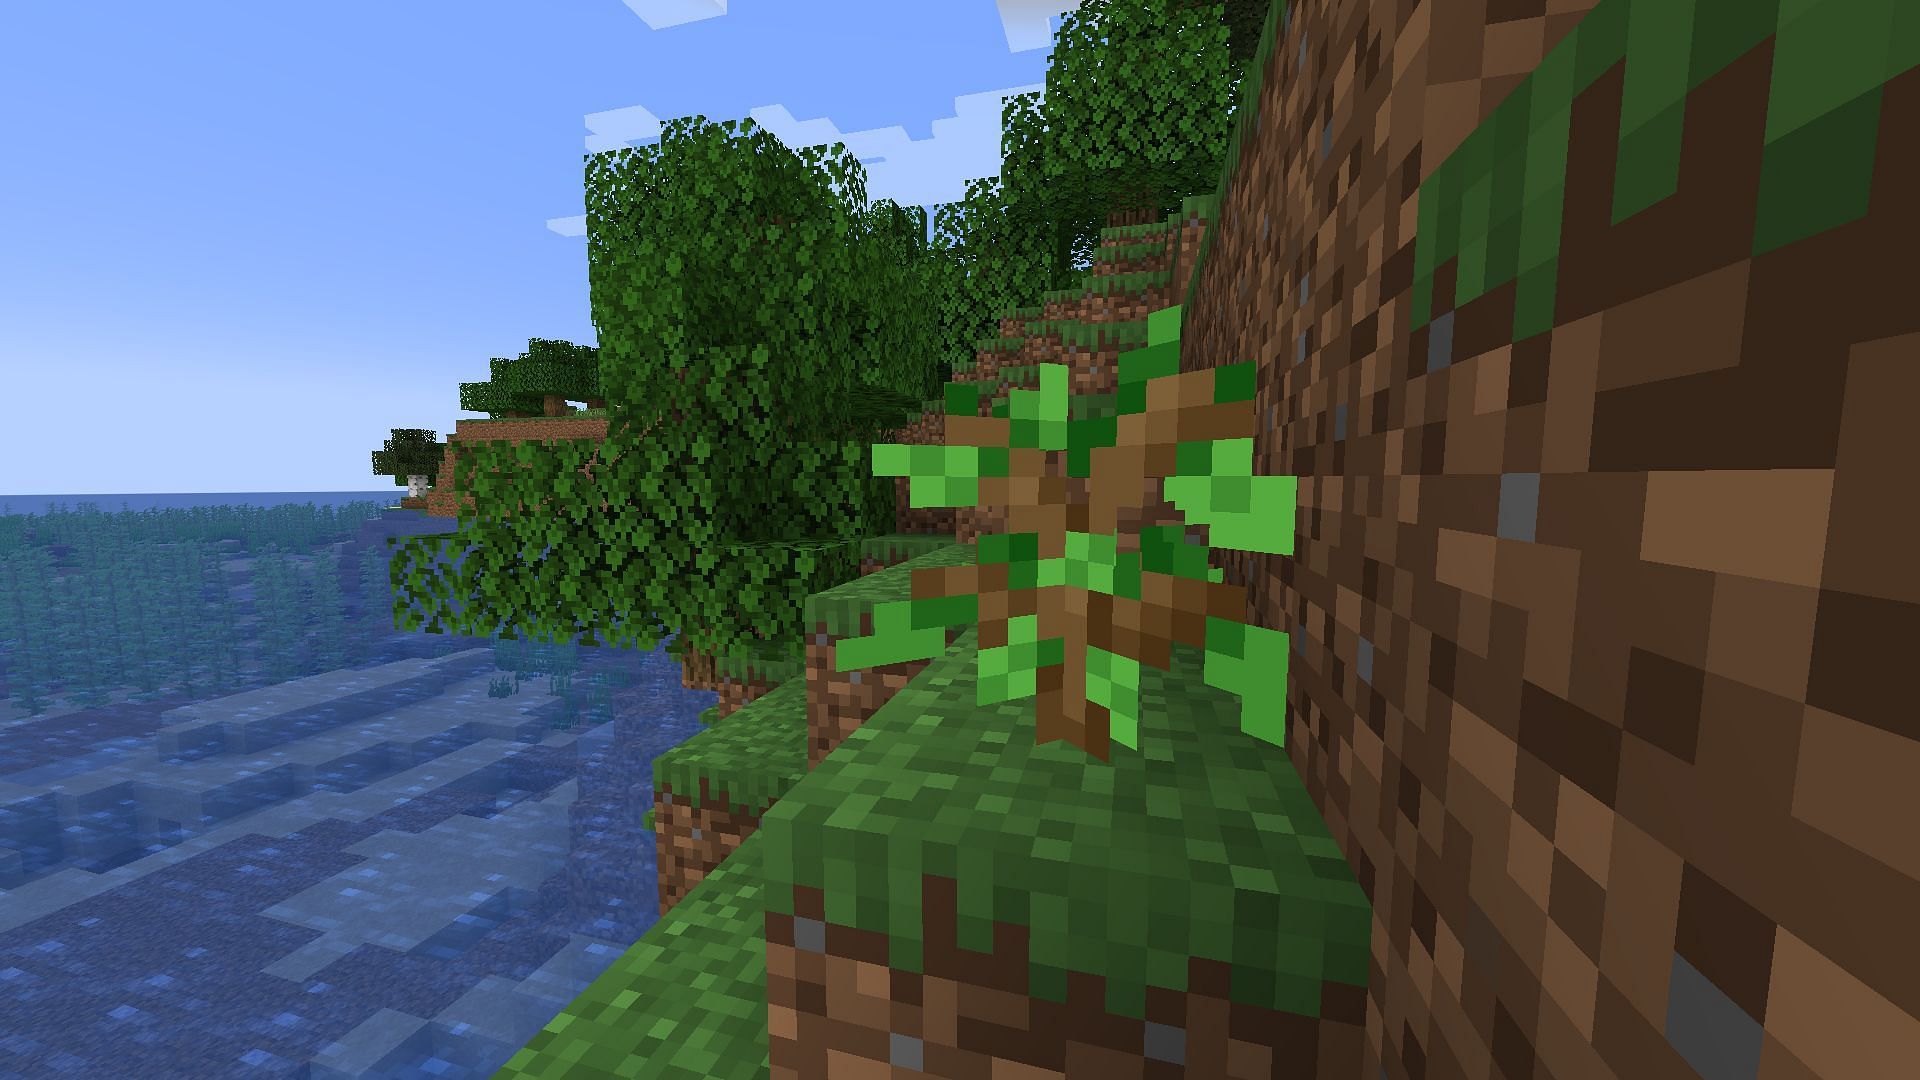 Players need to keep replanting trees to get wood in Minecraft (Image via Mojang)